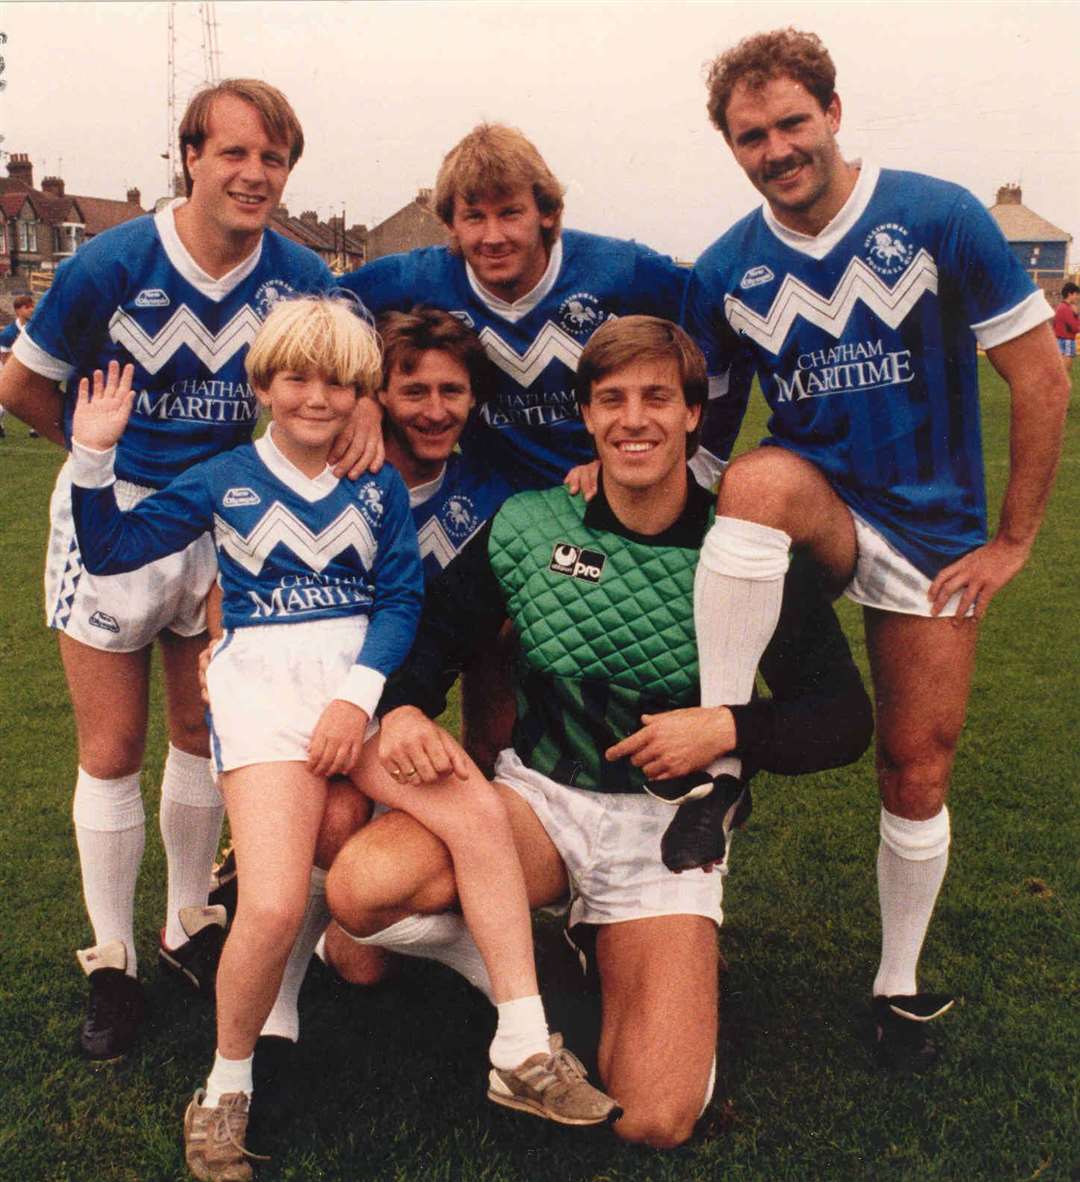 Dave Shearer and team-mates pictured in August 1987, months before he left the club